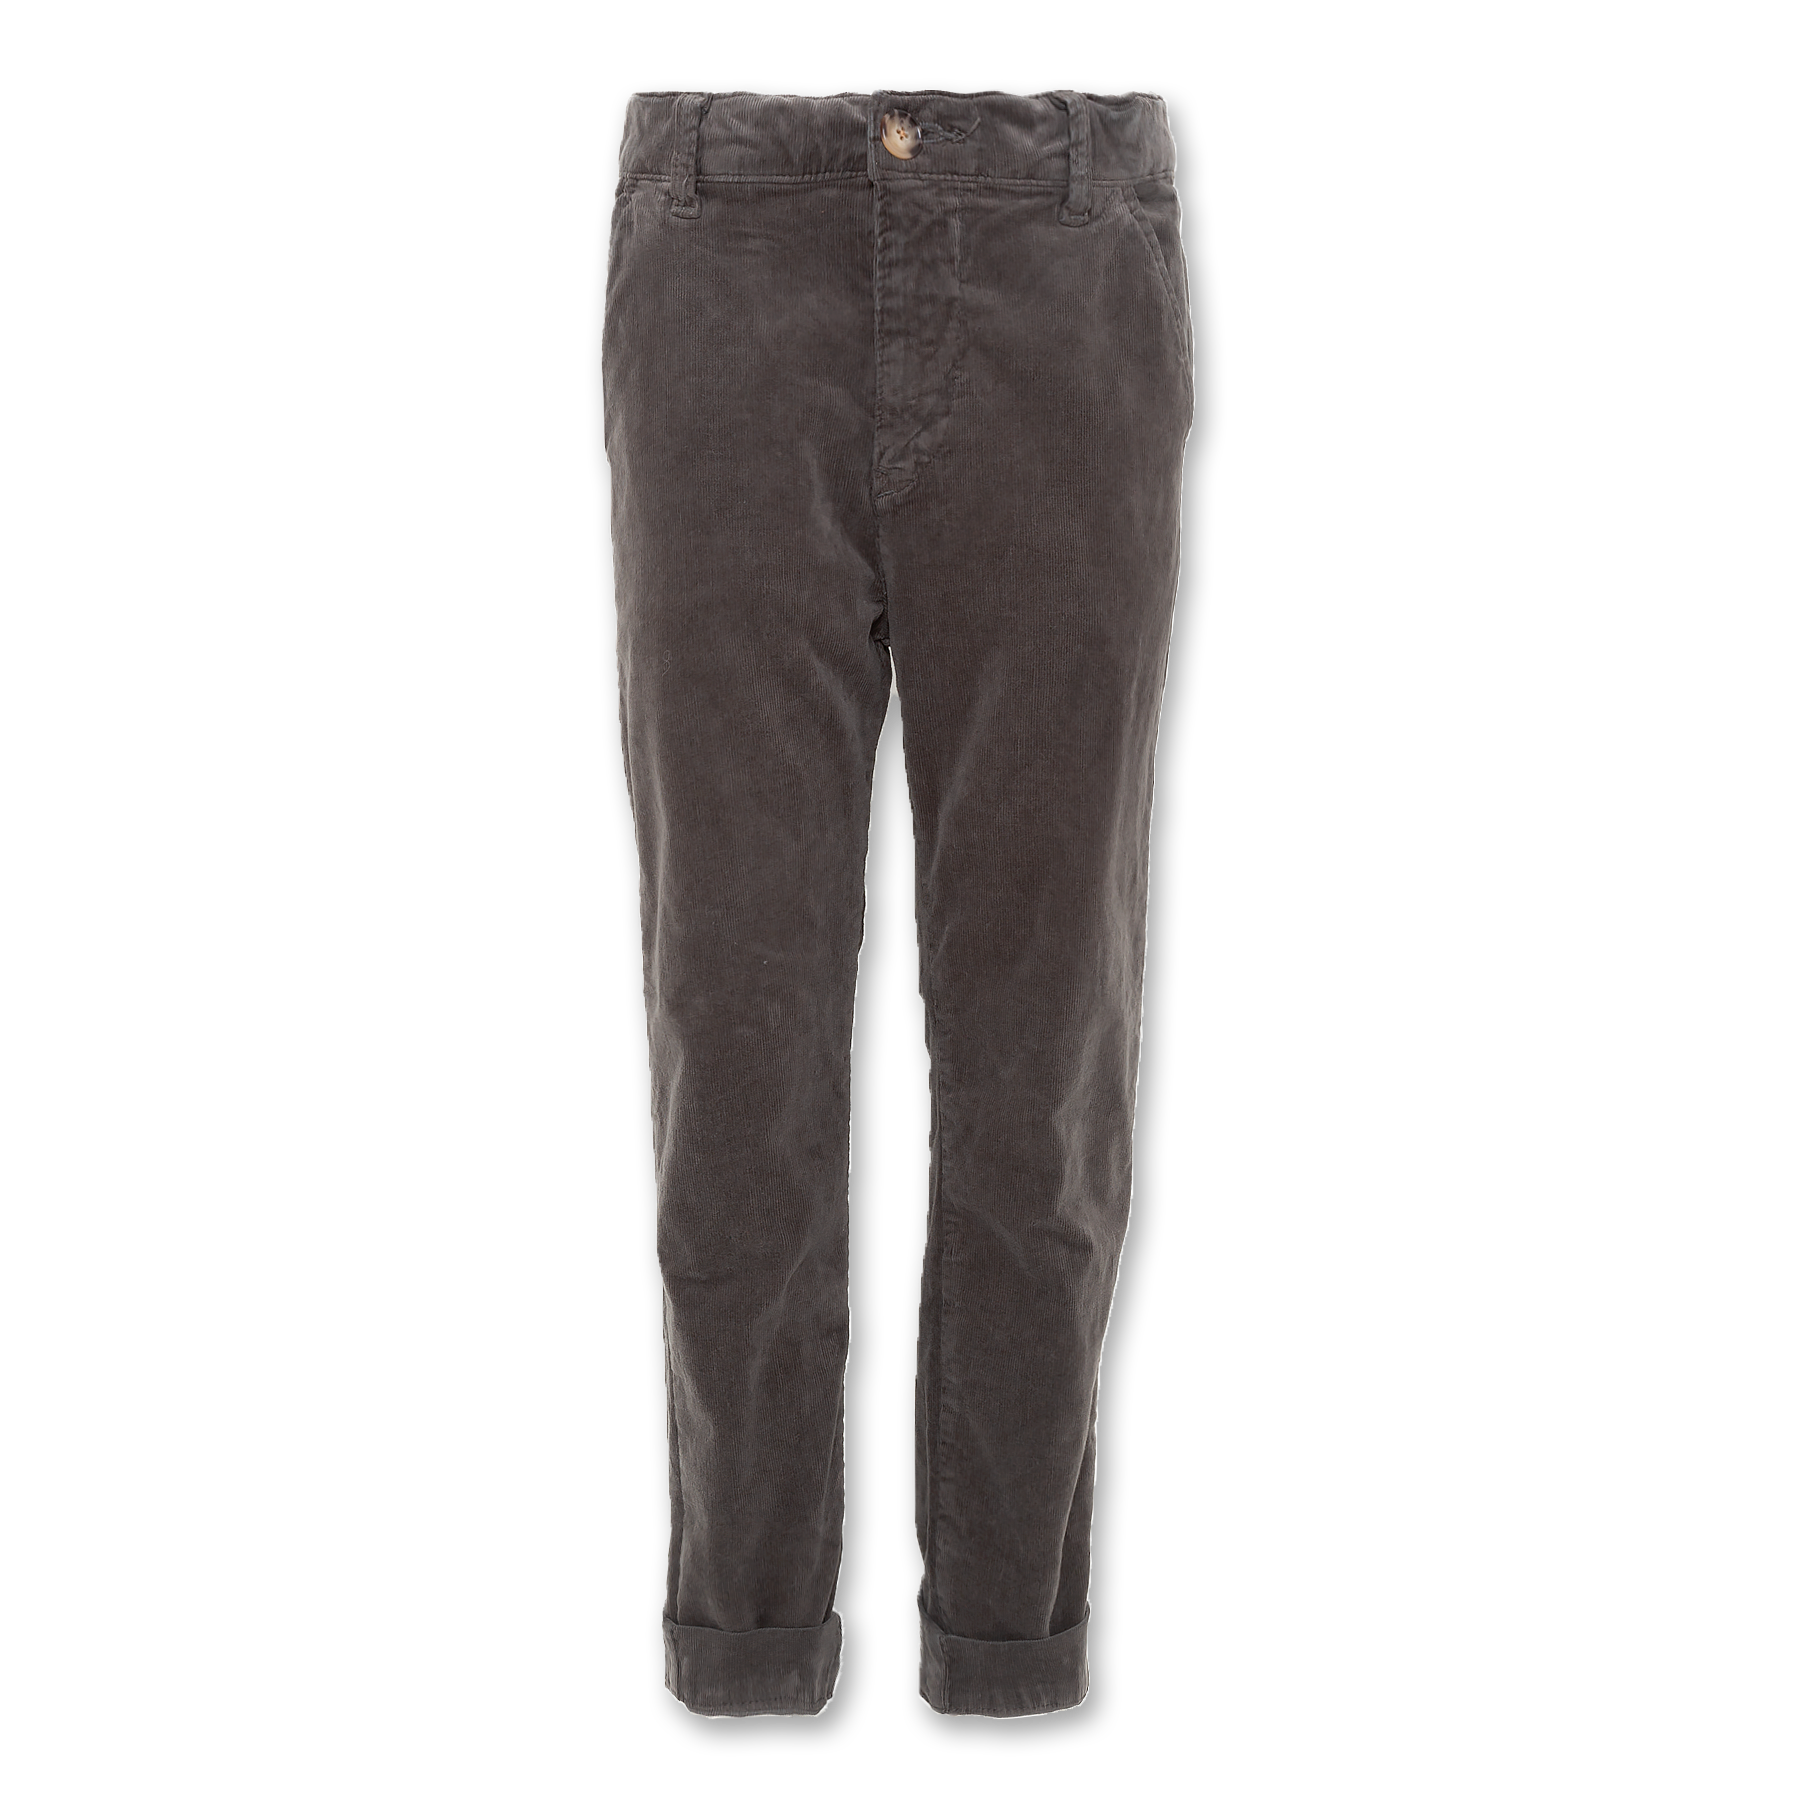 AO76 Forest AO 76 Bill Relaxed Pants